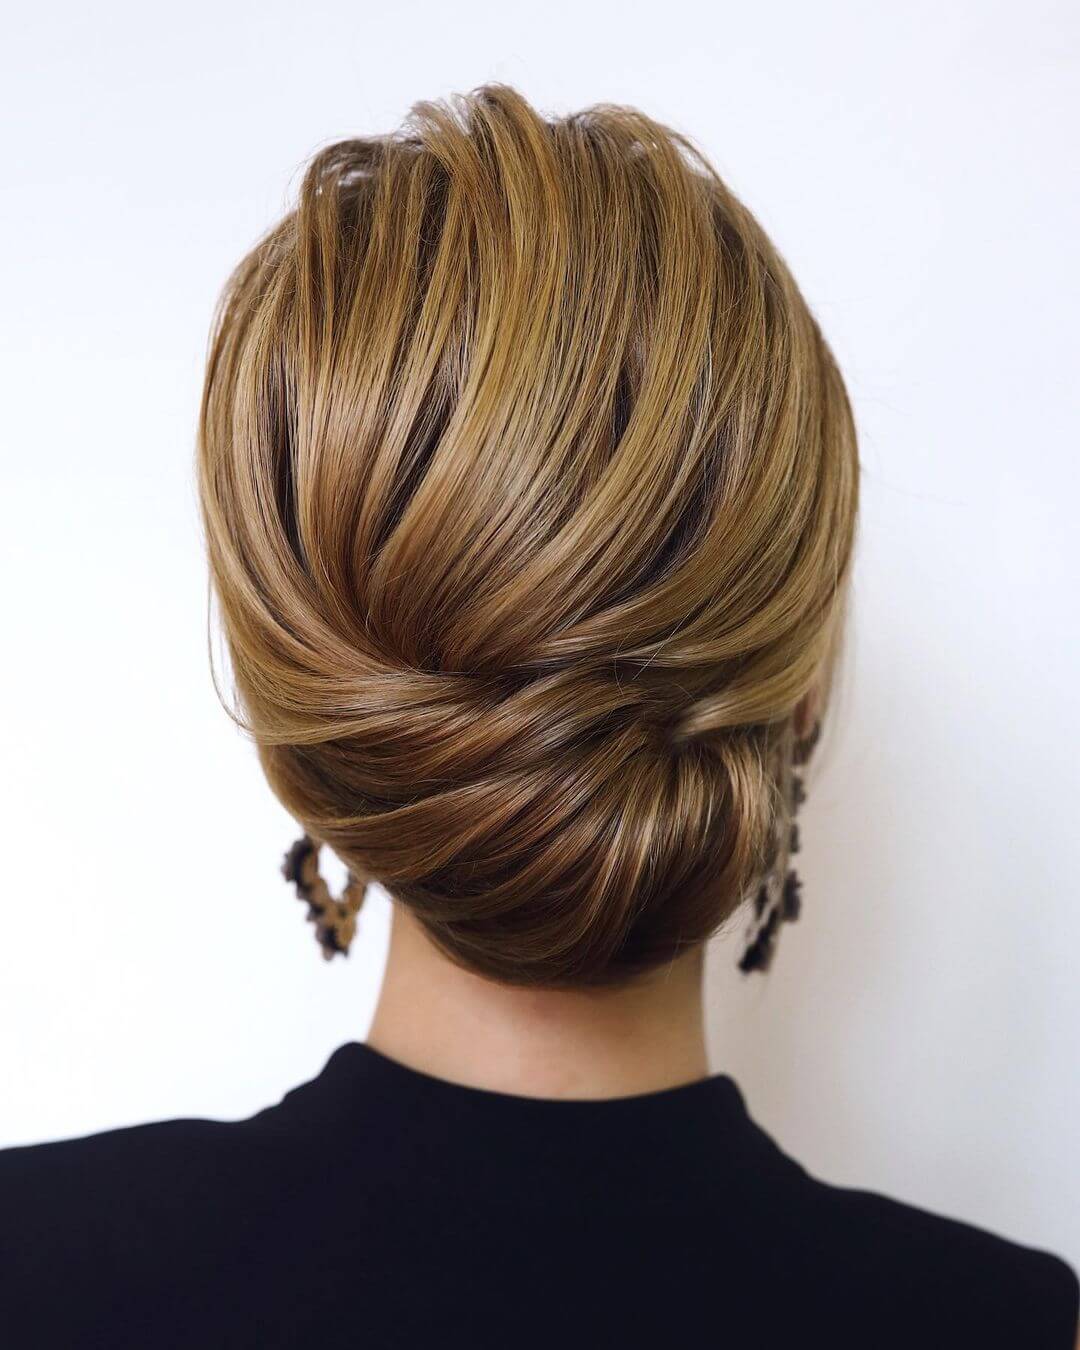 Different Bun Hairstyle that are Easy to Make Twist and twirl your bun!